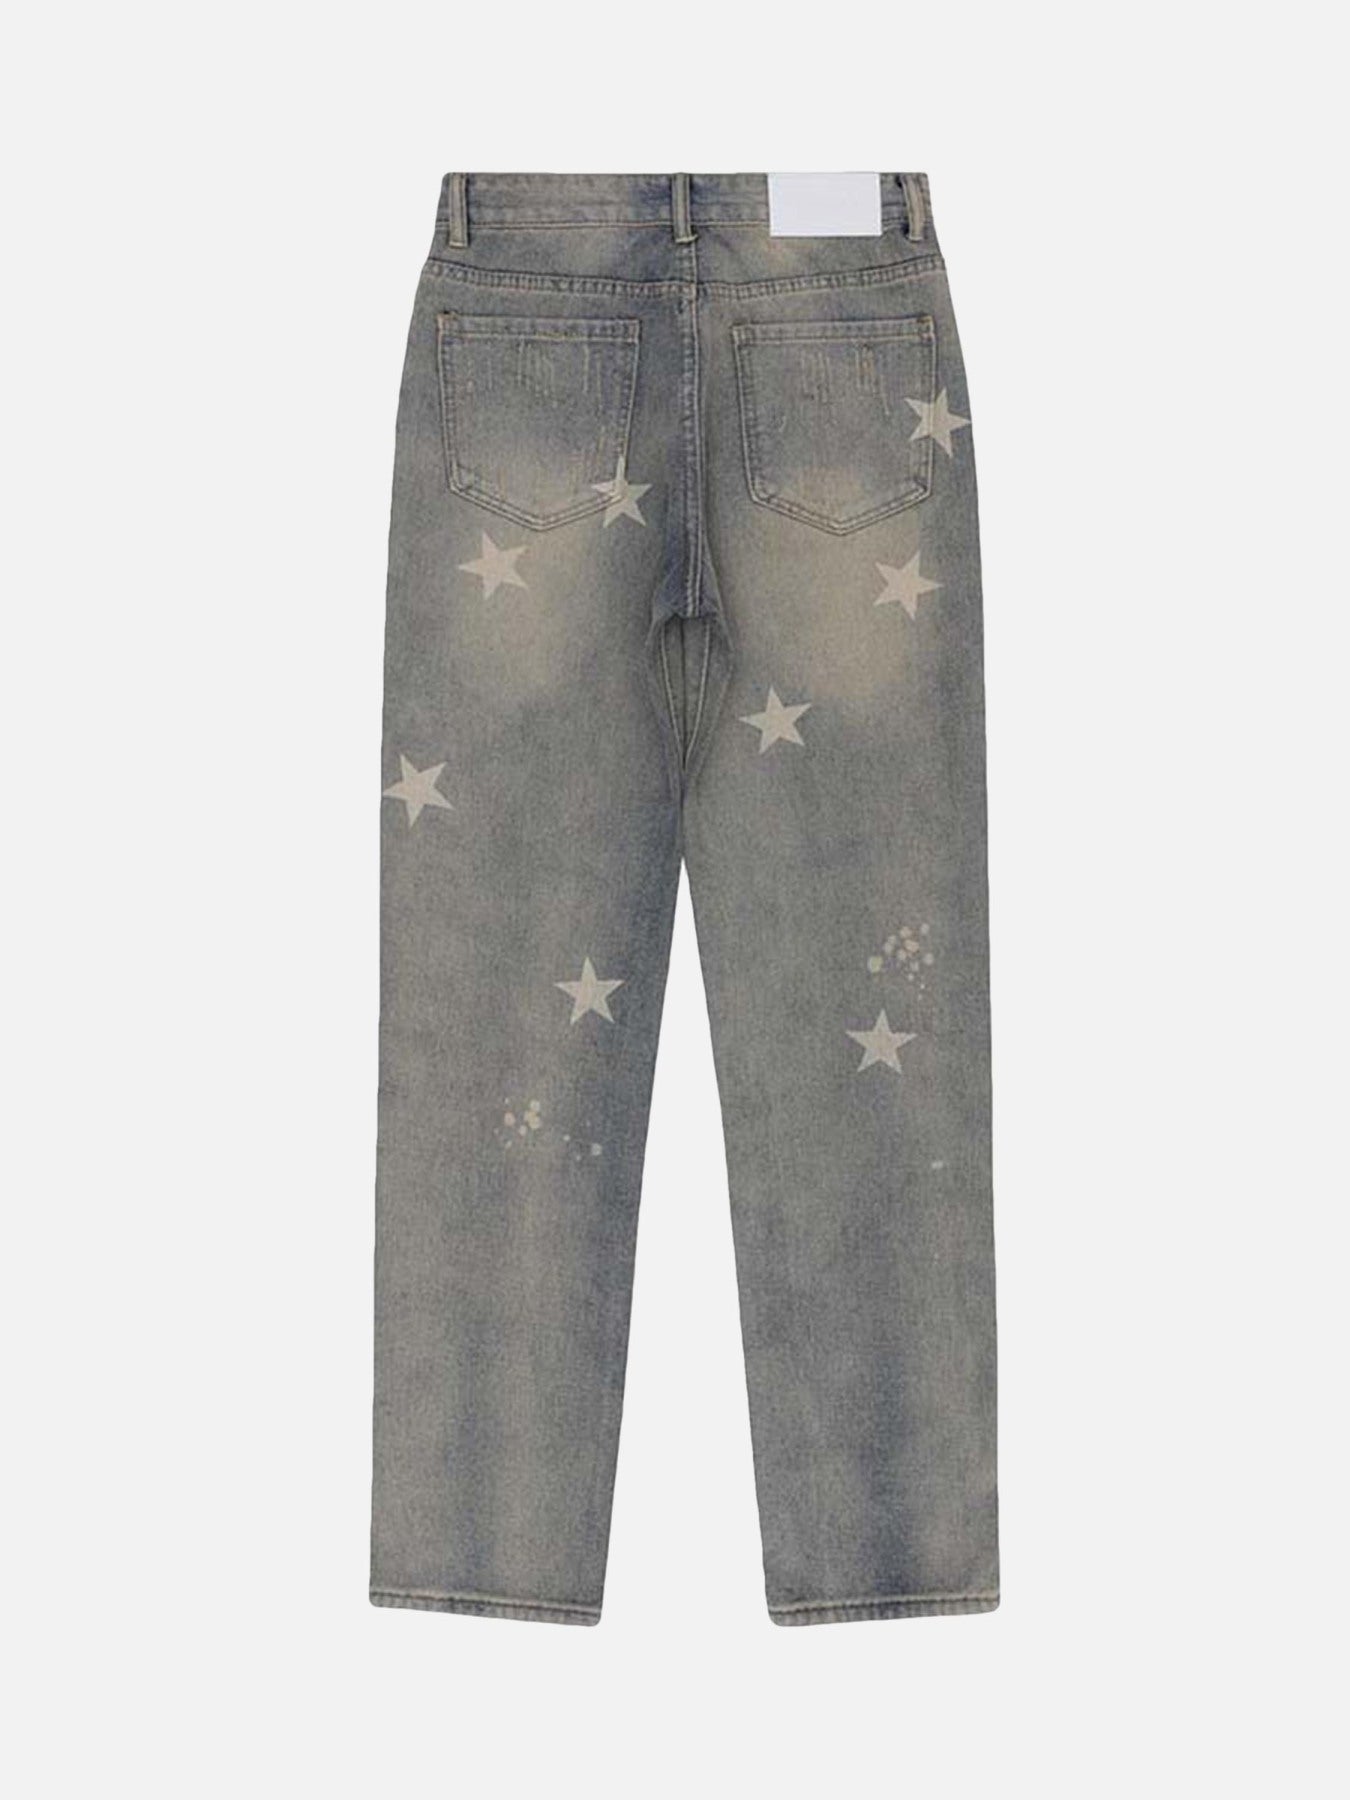 Thesupermade Washed And Aged Star Print Jeans